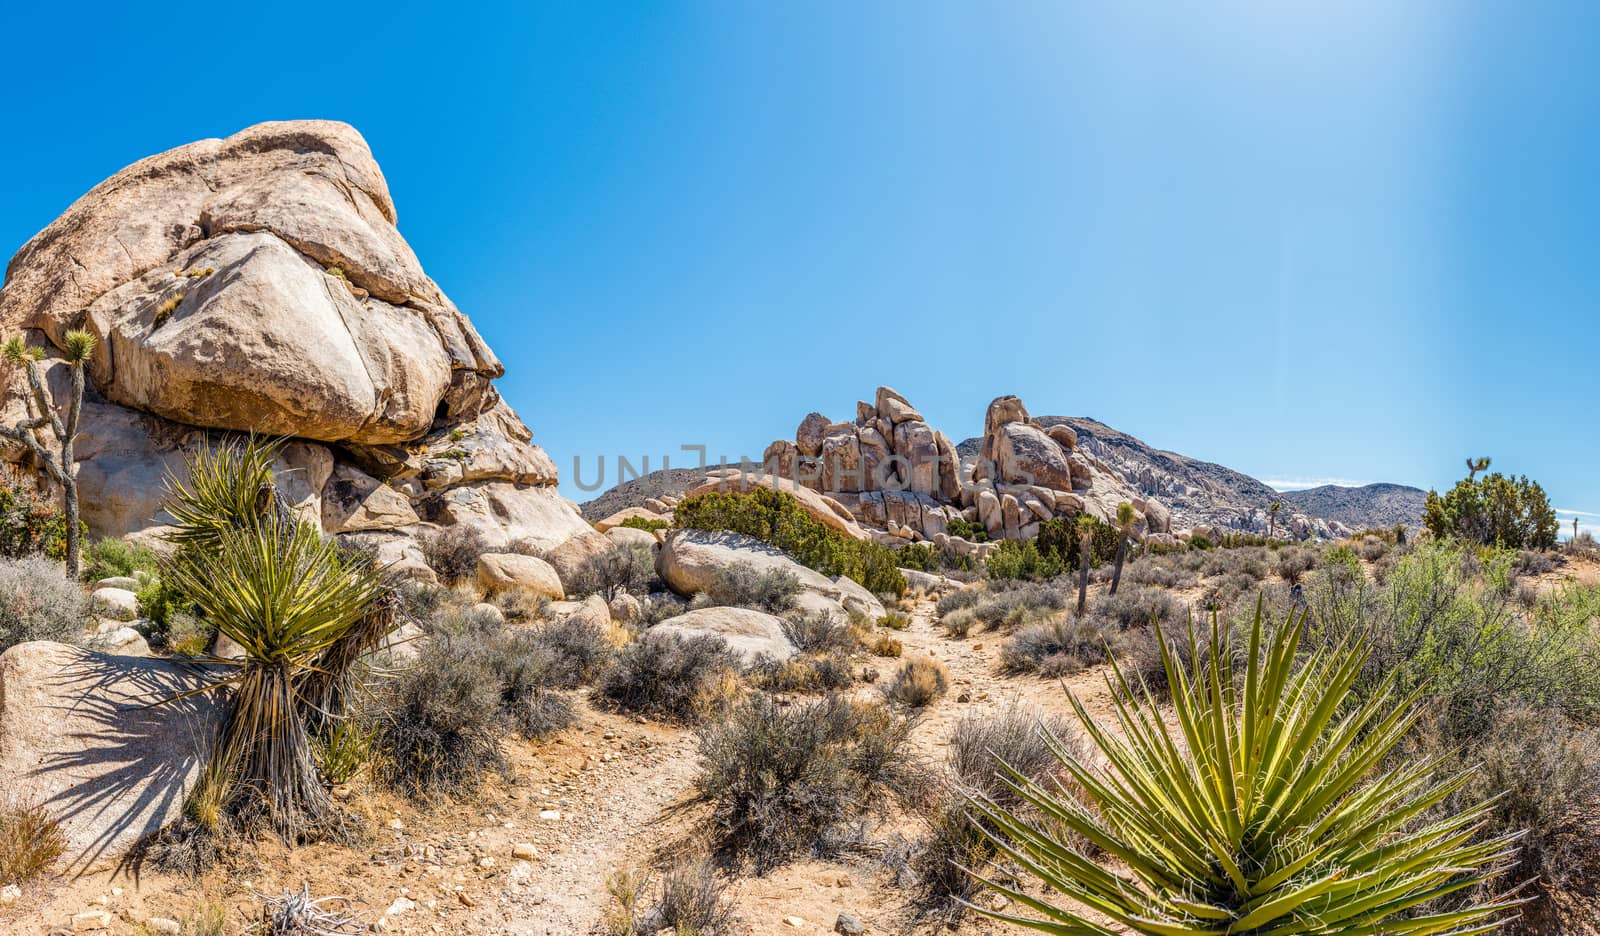 Panorama of Hall of Horrors area in Joshua Tree National Park, C by Njean